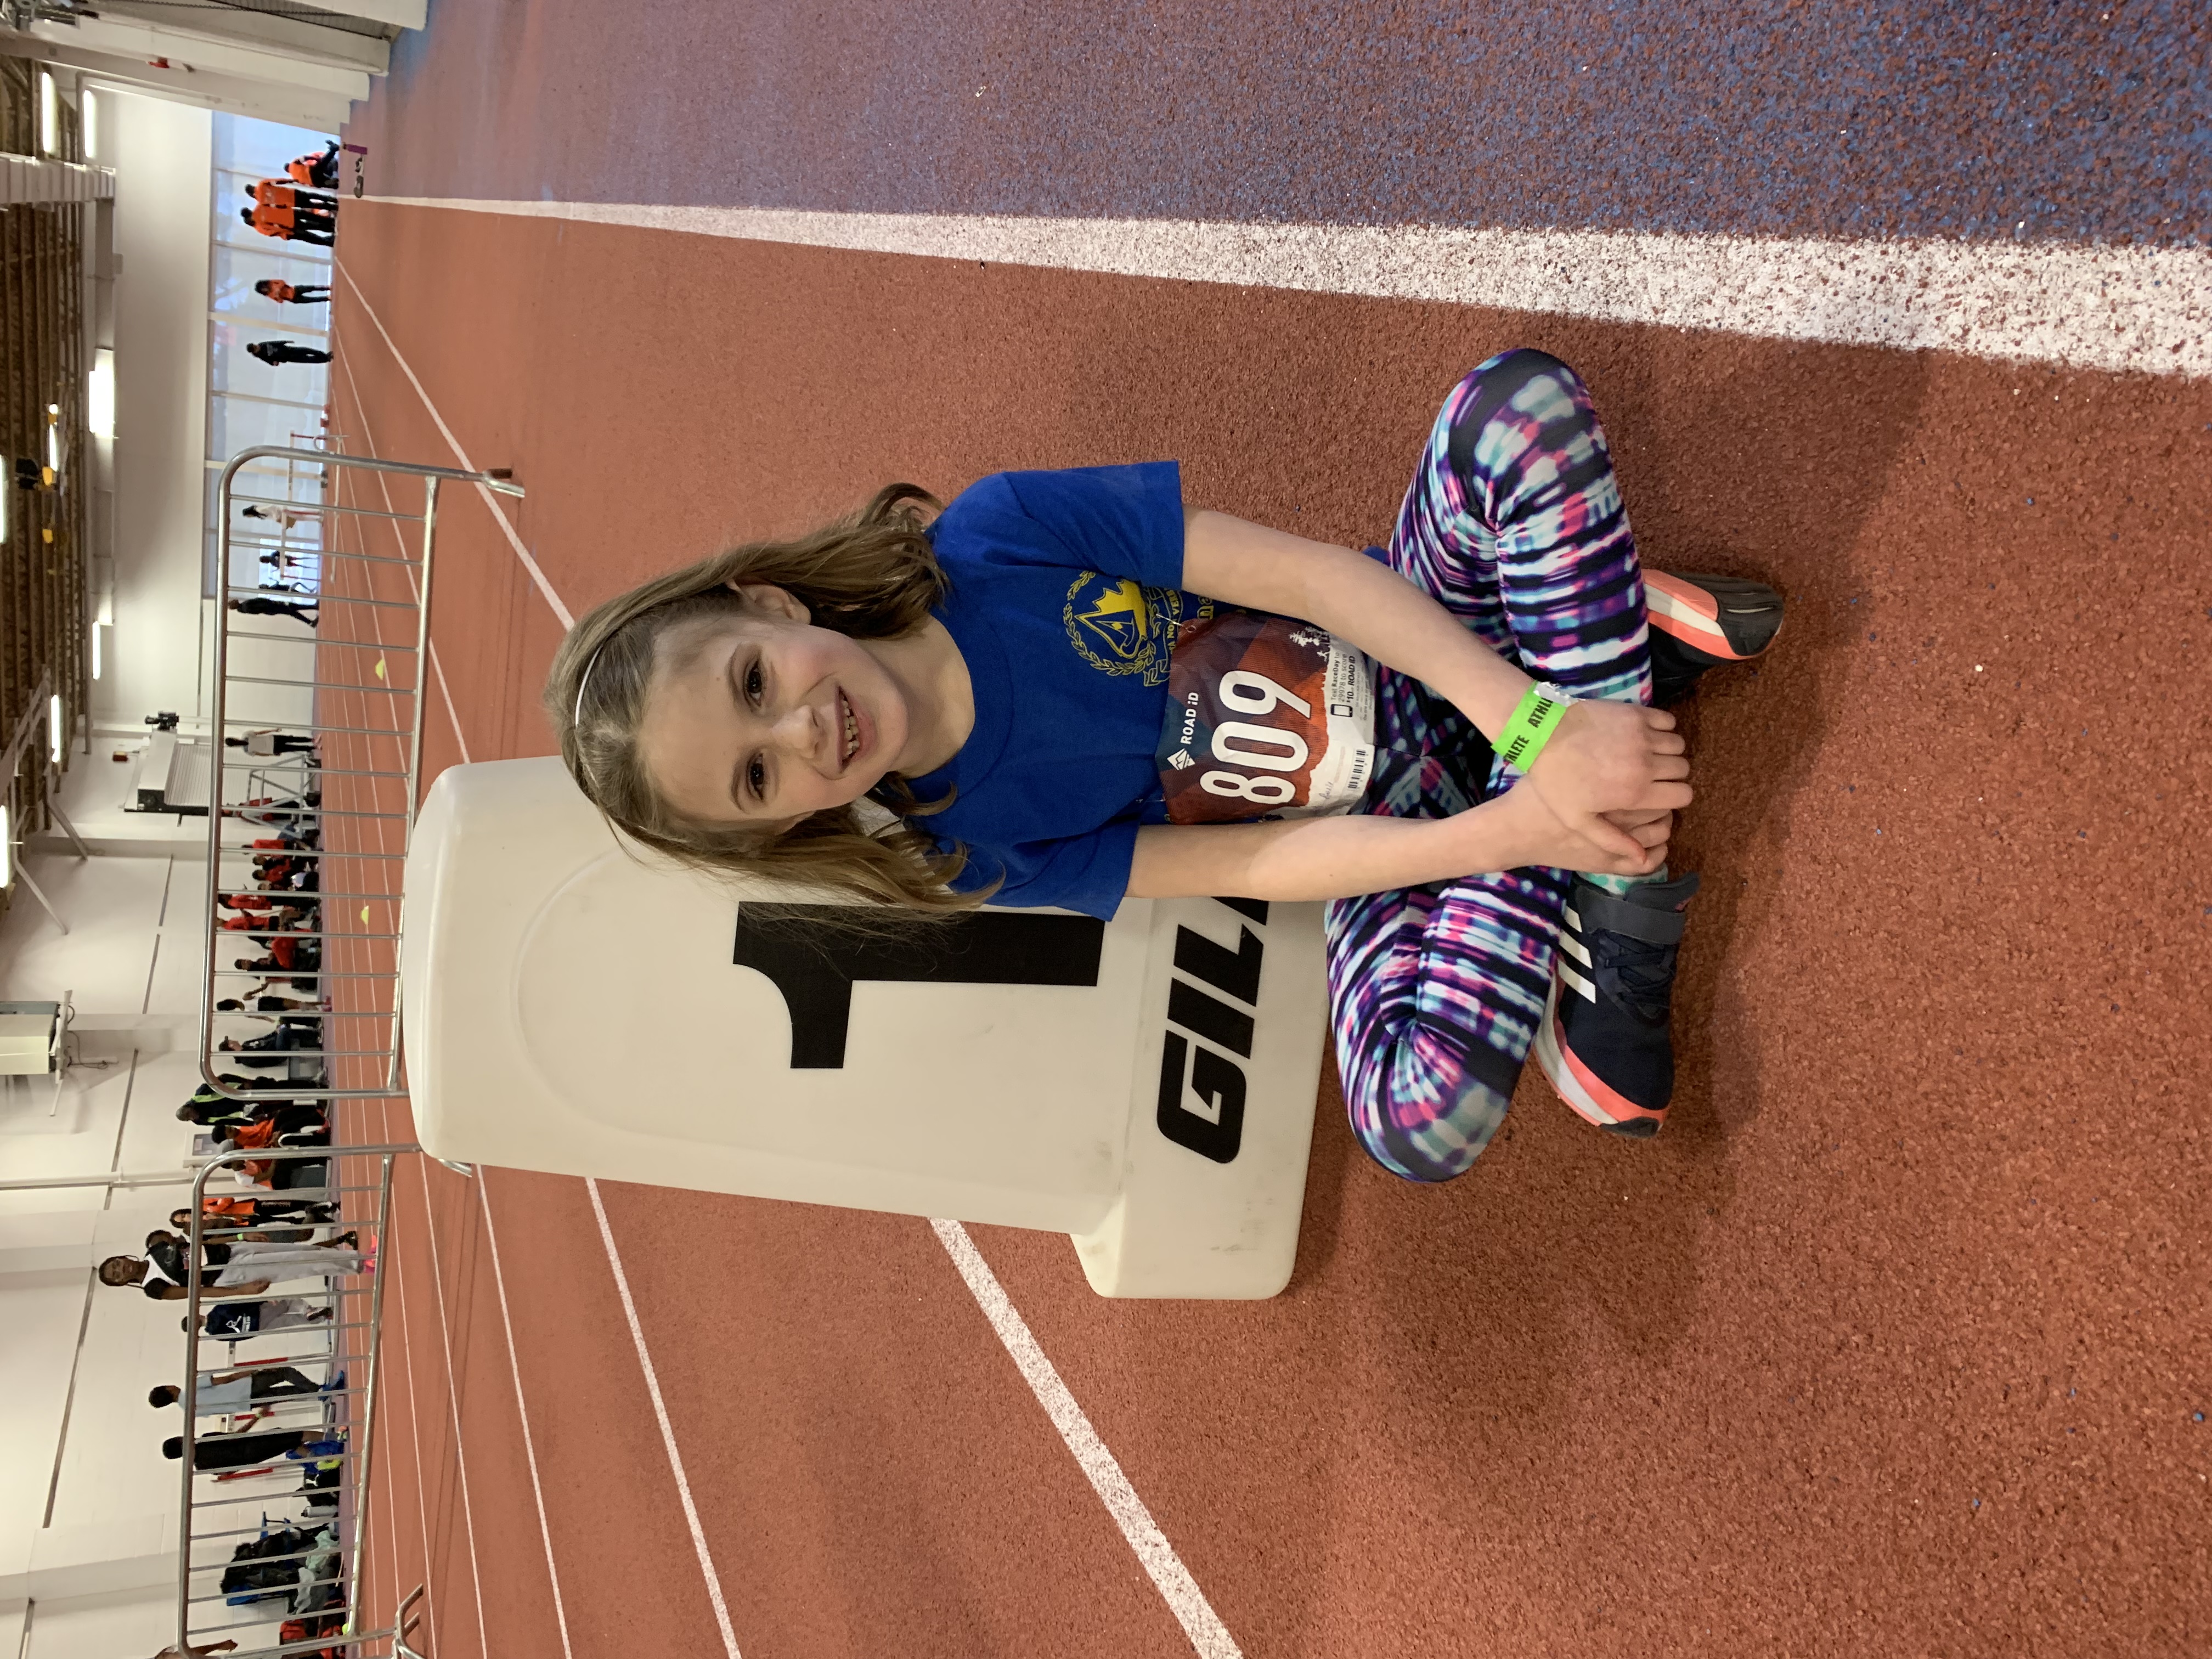 Rosie White sits patiently beside her lane marker, waiting for the final of the Under-9 girls 60m, as part of the 2023 Ontario Indoor Track and Field Showcase at York University.  She was seventh in the Final, recording a Personal Record (P.R.) of 11.71 seconds. | Andrea Hammell